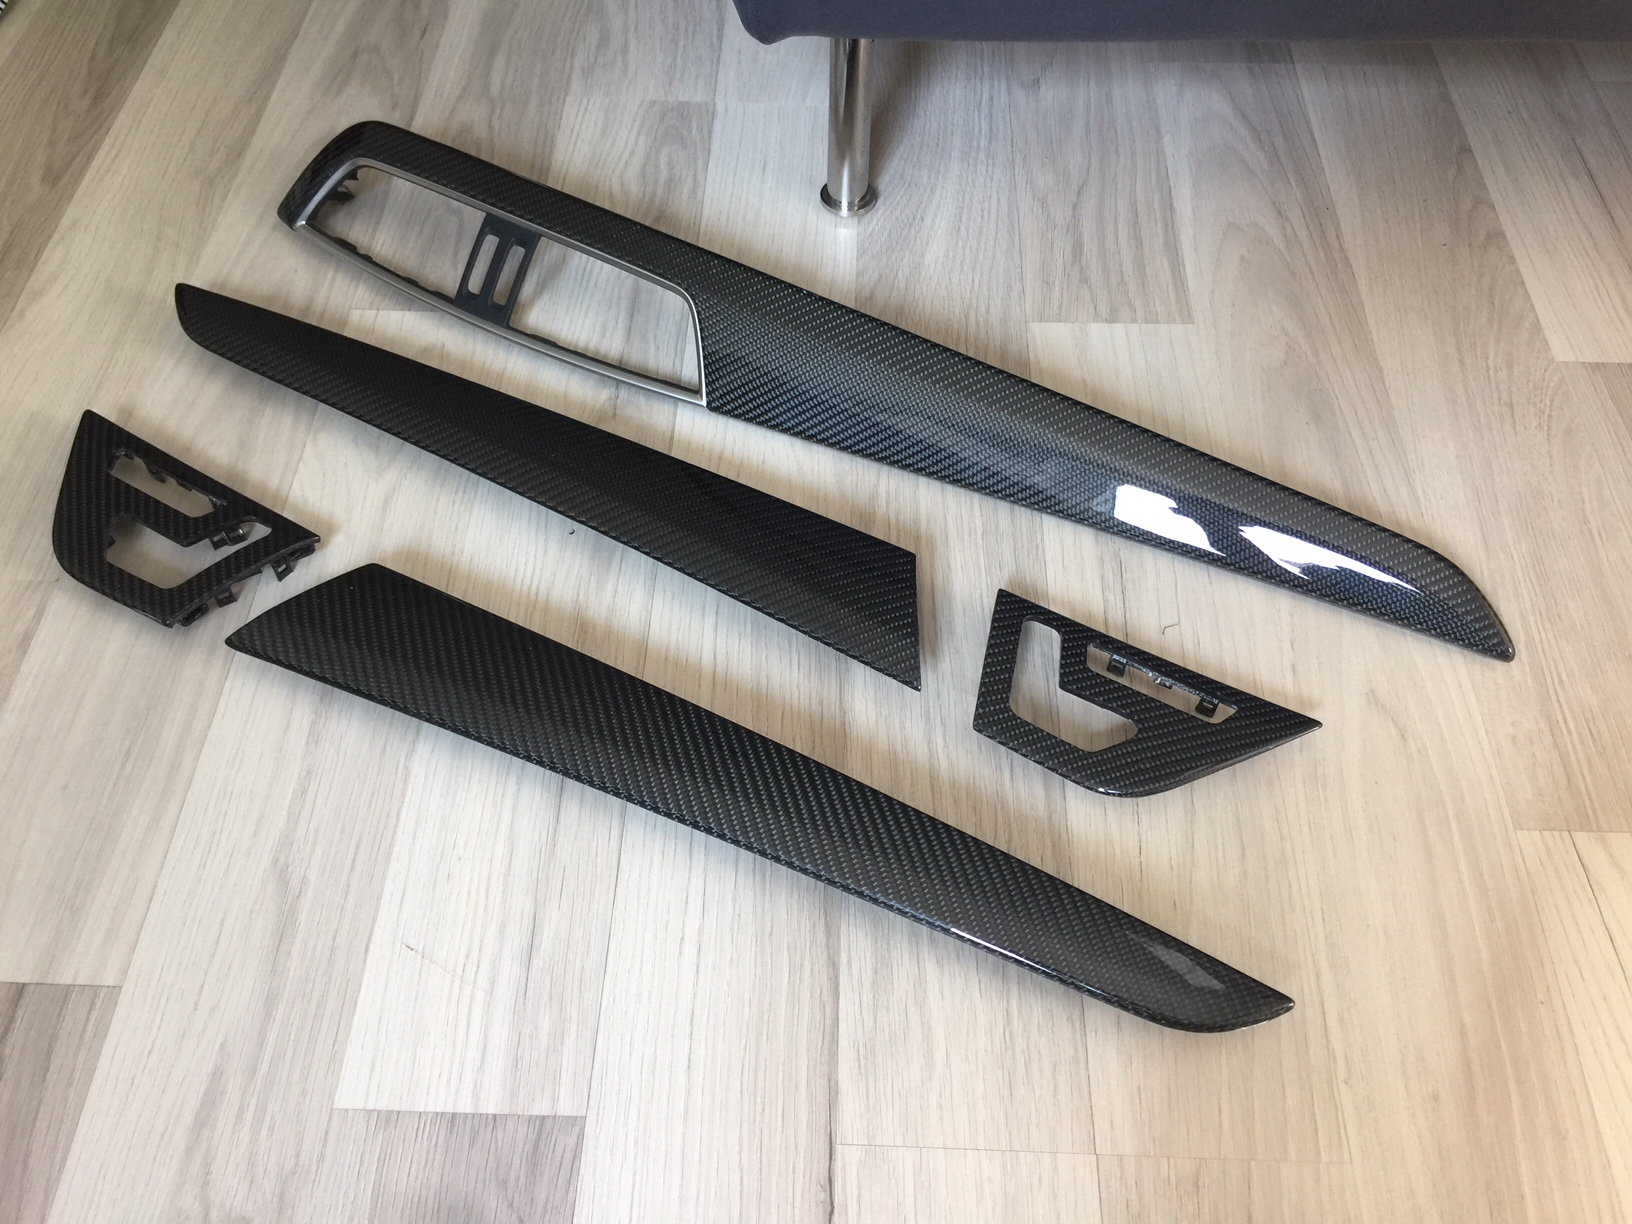 Interior/Upholstery - FS: New Carbon Fibre Interior Trims for C204 C63 AMG Coupe - New - 2011 to 2014 Mercedes-Benz C63 AMG - Kolobrzeg, Poland